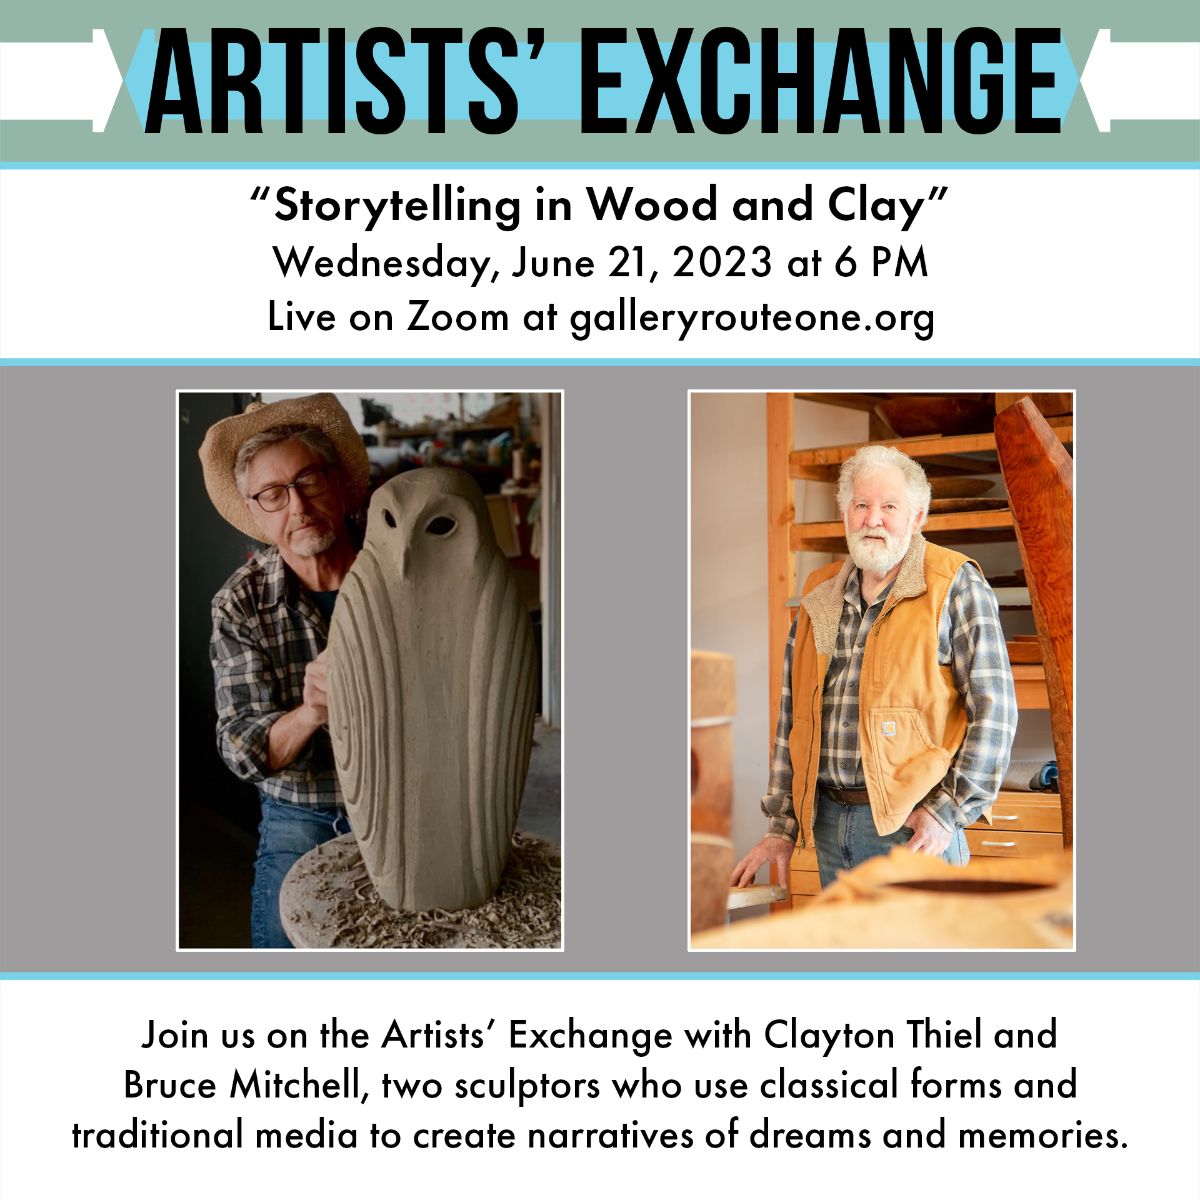 Artists' Exchange with Clayton Thiel and Bruce Mitchell